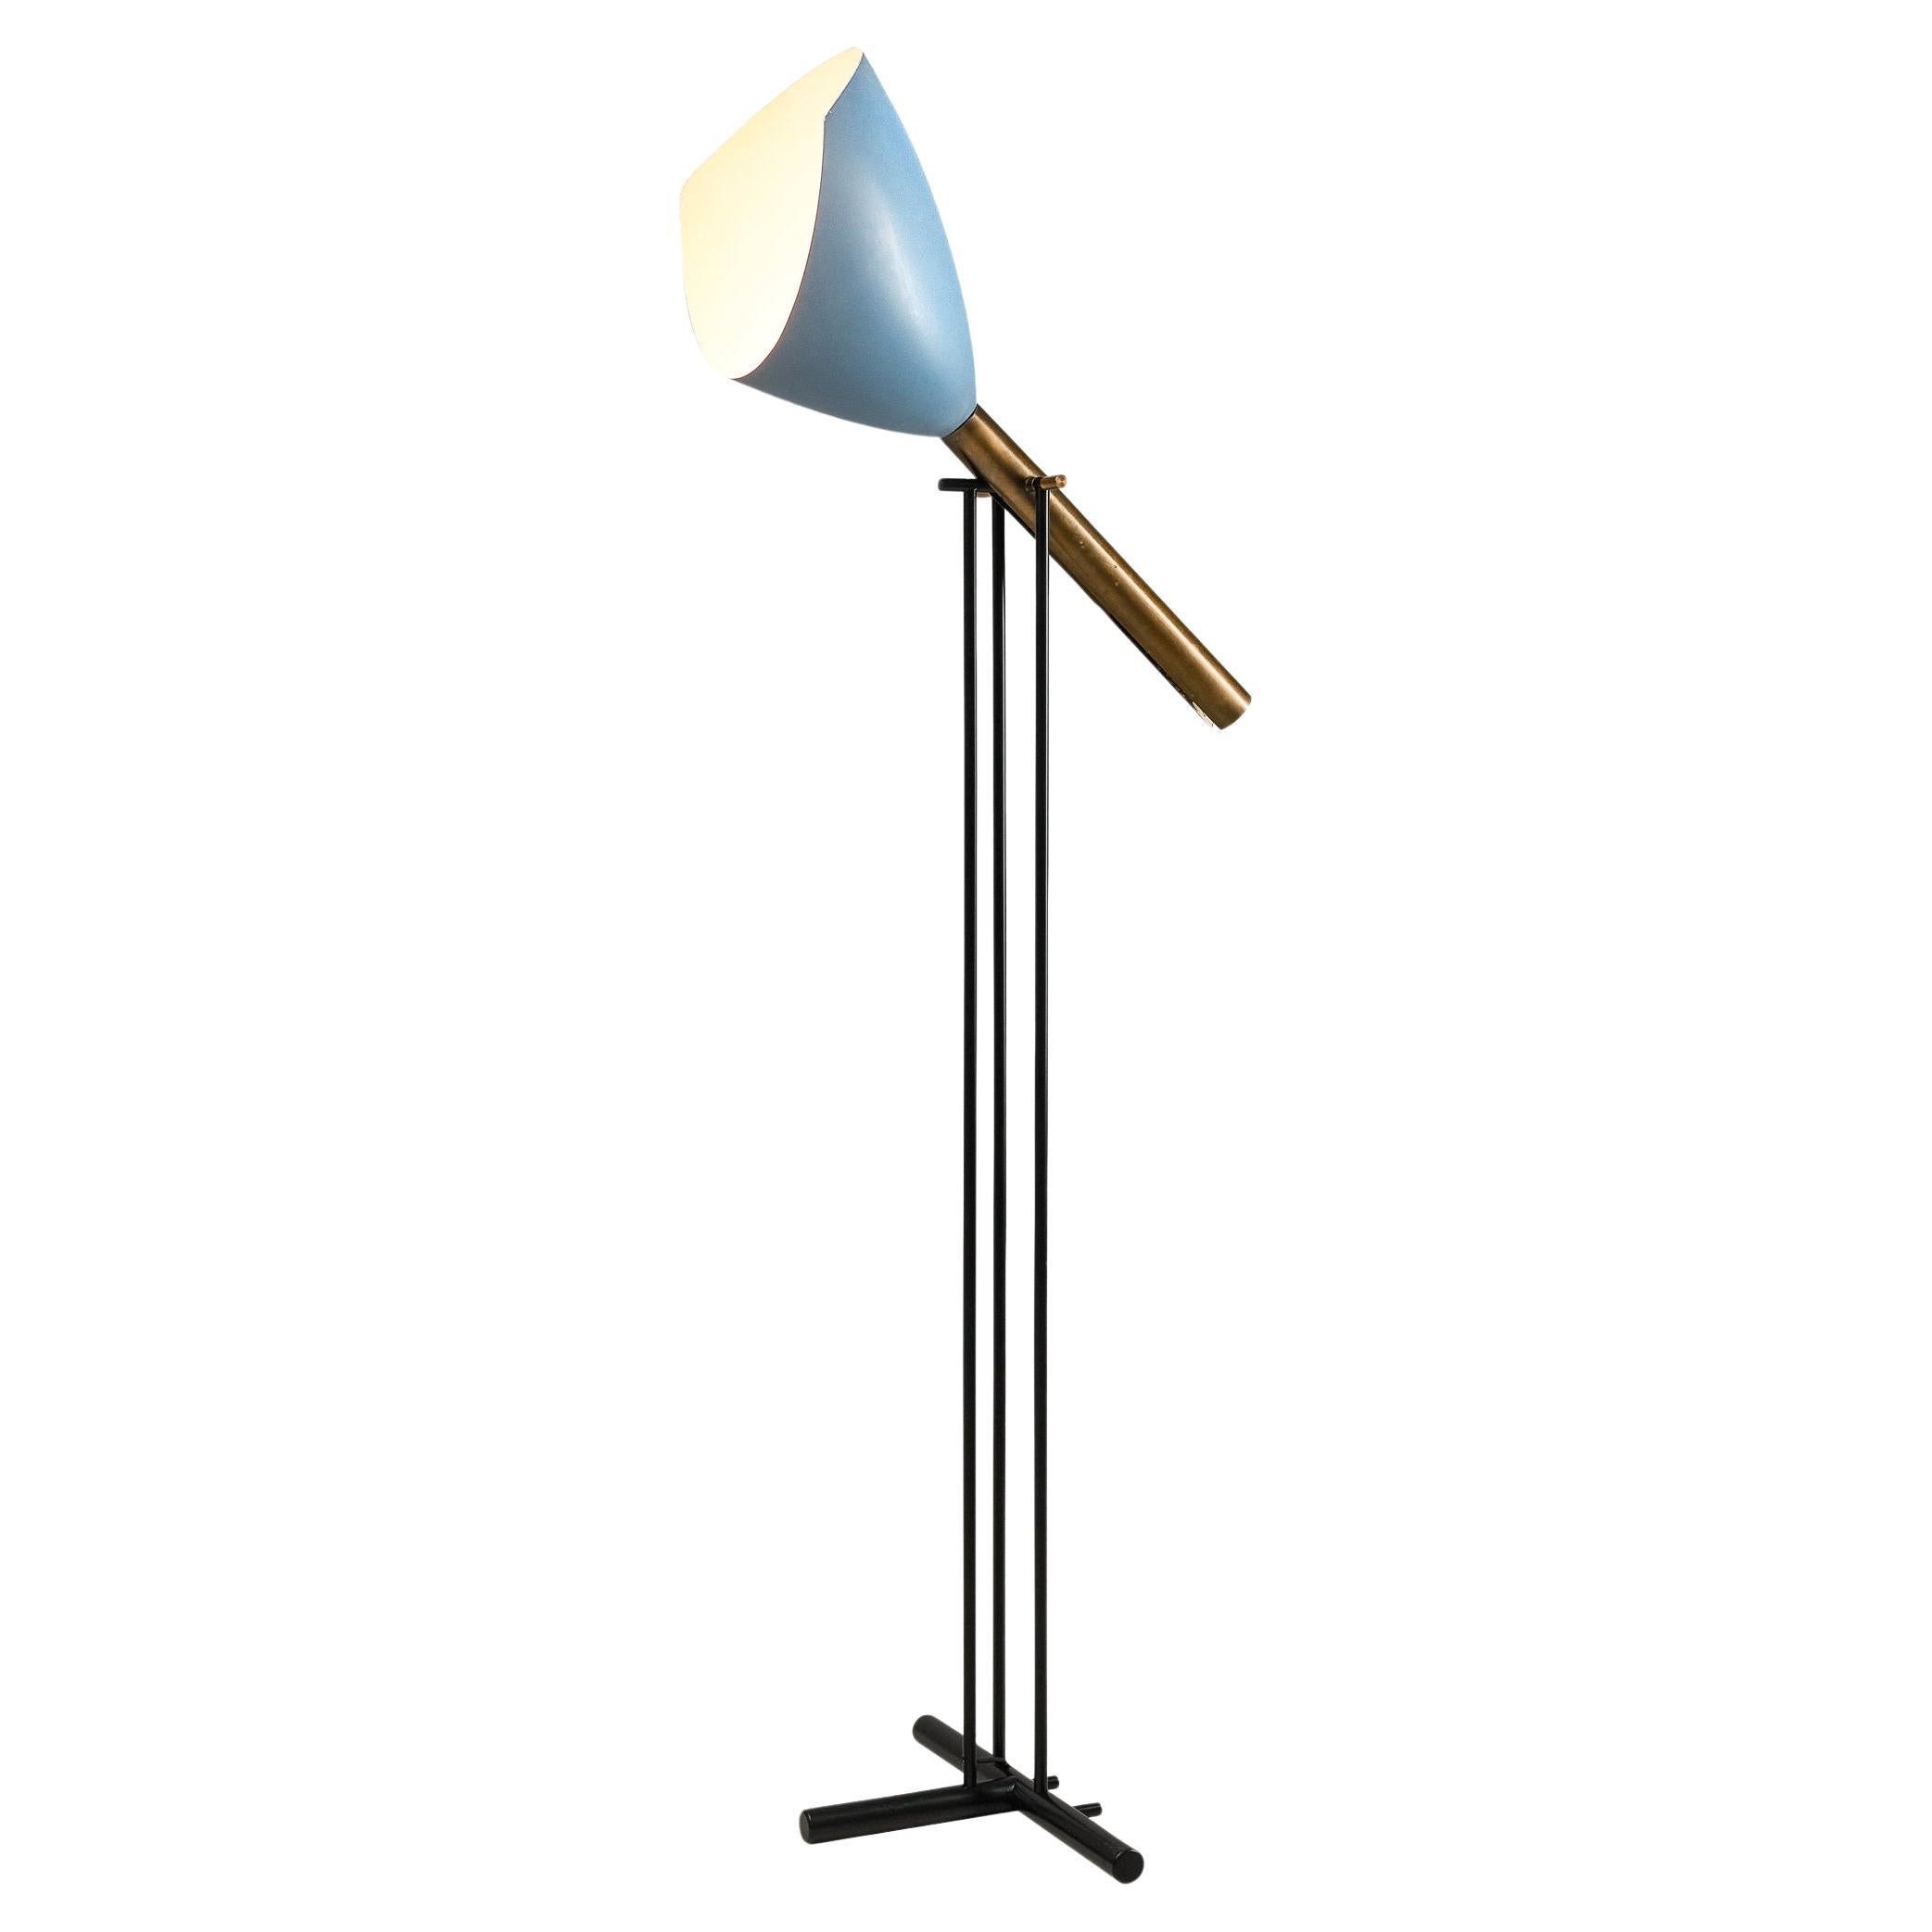 Angelo Lelii for Arredoluce ‘Televisione’ Floor Lamp in Brass and Aluminum 